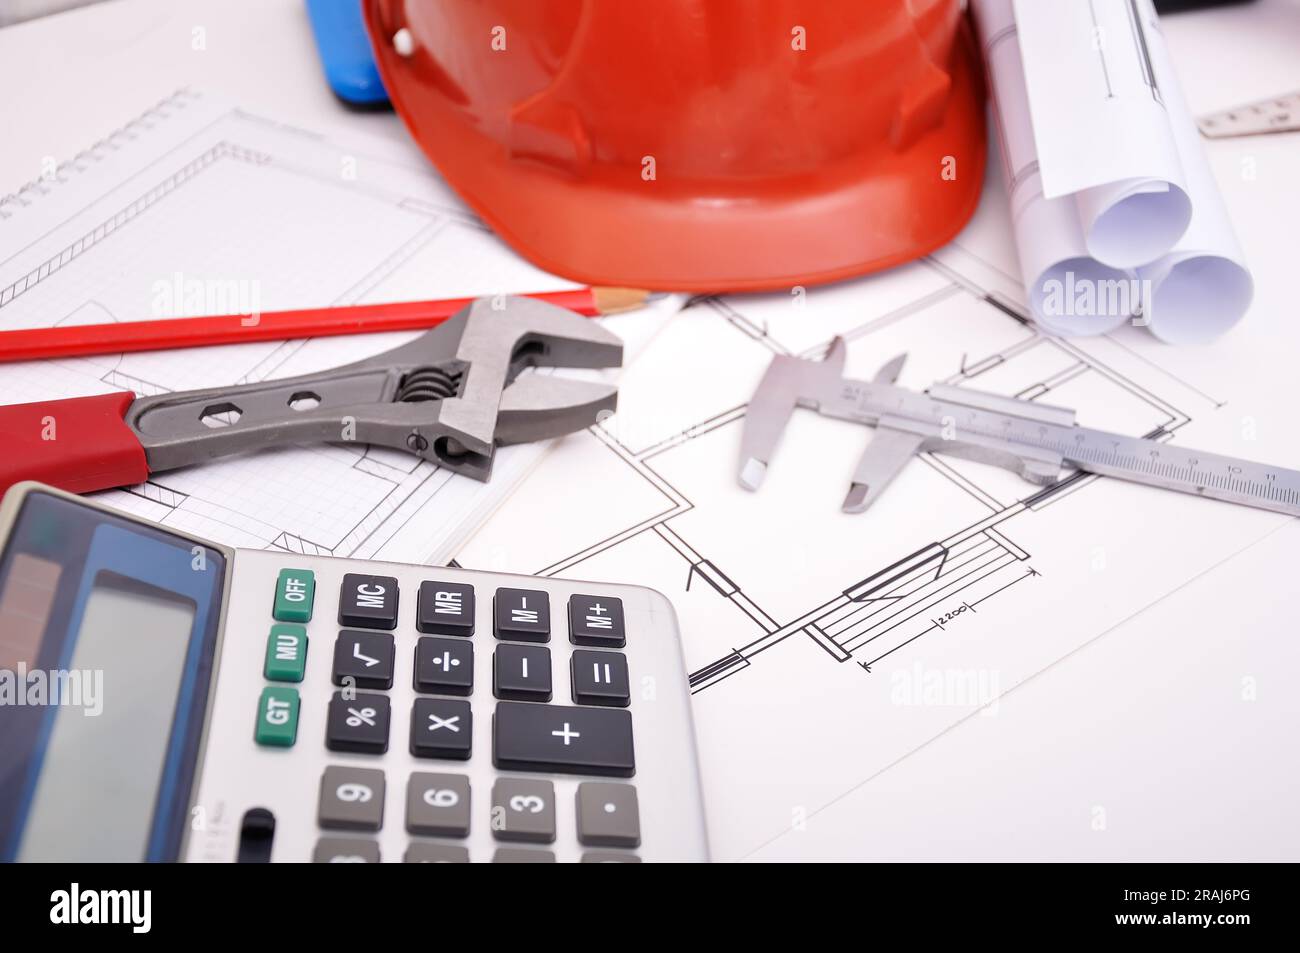 Calculator, helmet and drafting tools on architectural table Stock Photo